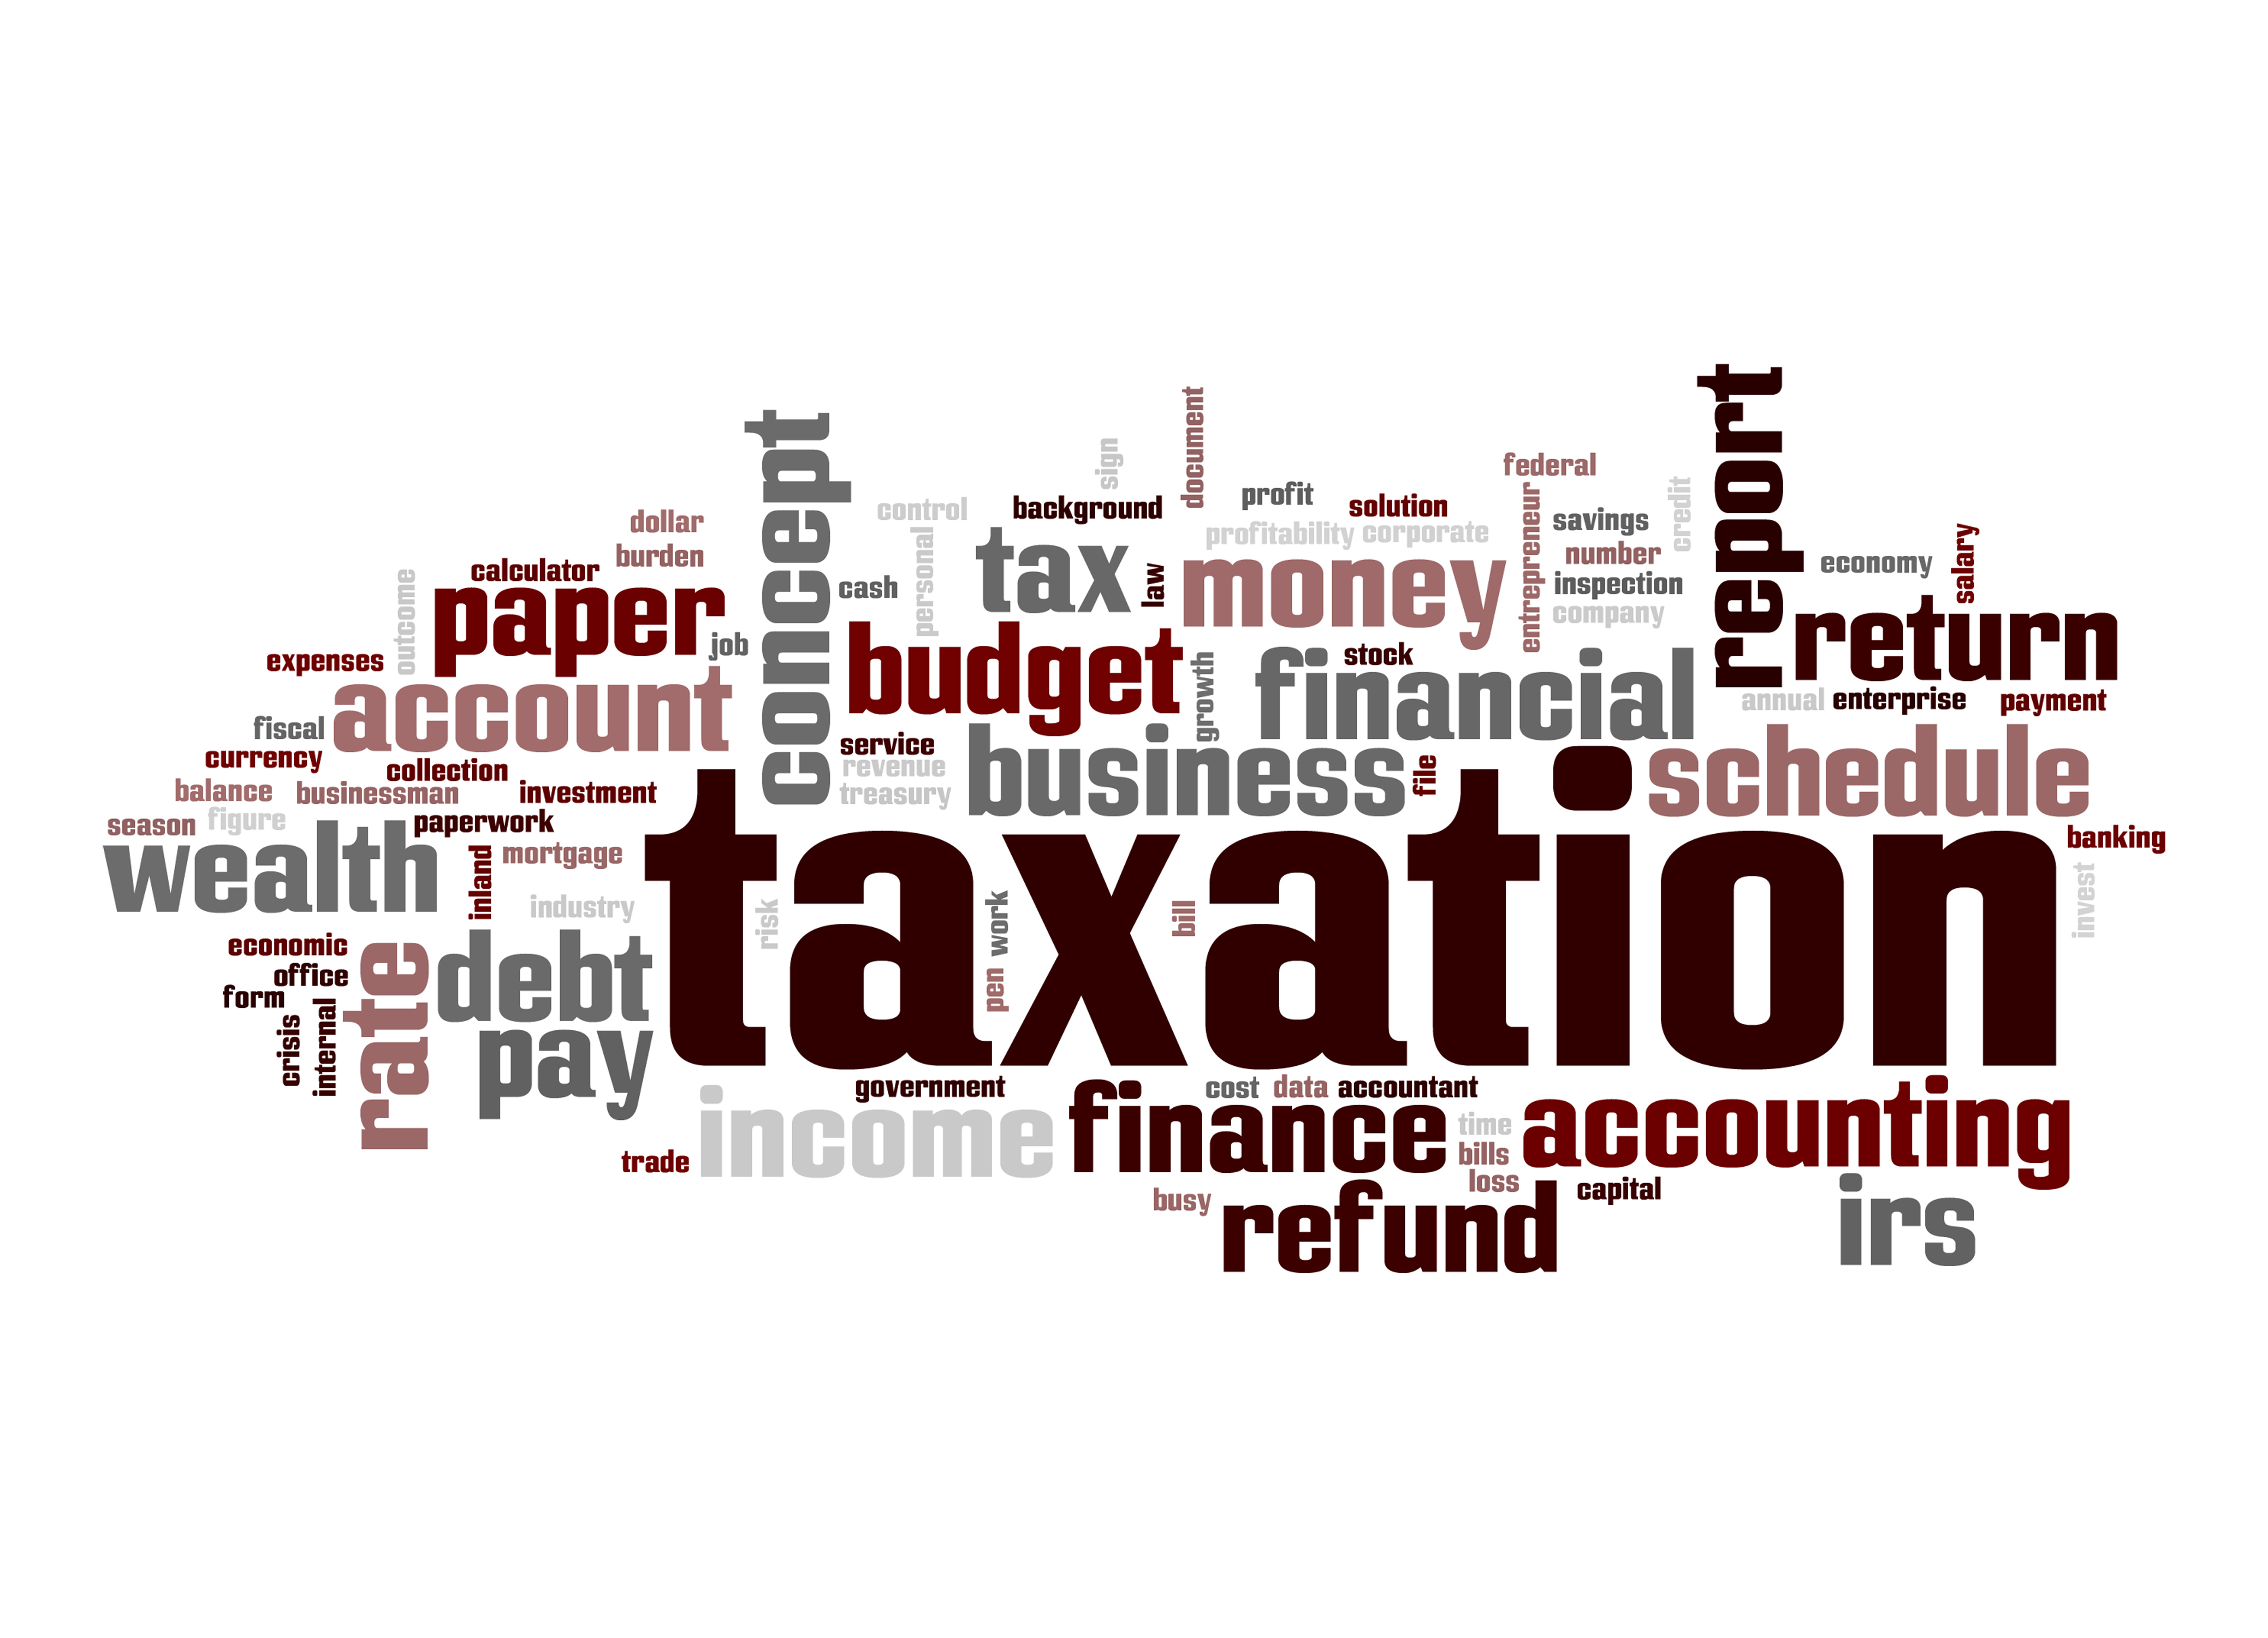 Tax administration: Action aid, Oxfam call for govt accountability